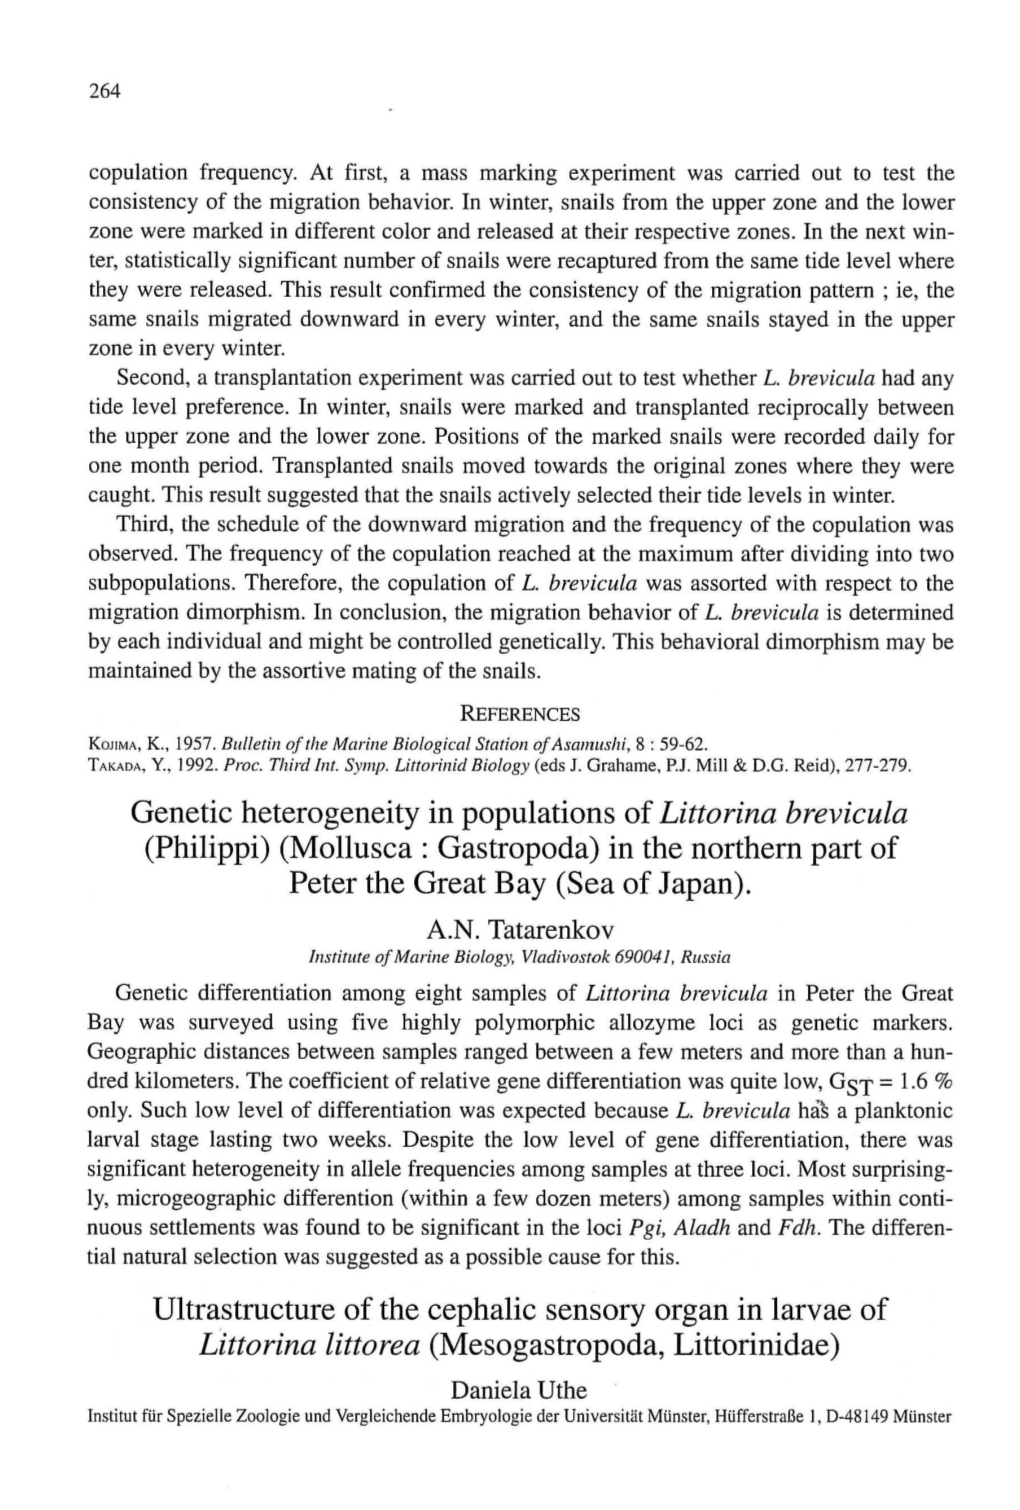 Genetic Heterogeneity in Populations of Littorina Brevicula (Philippi) (Mollusca : Gastropoda) in the Northern Part of Peter the Great Bay (Sea of Japan)